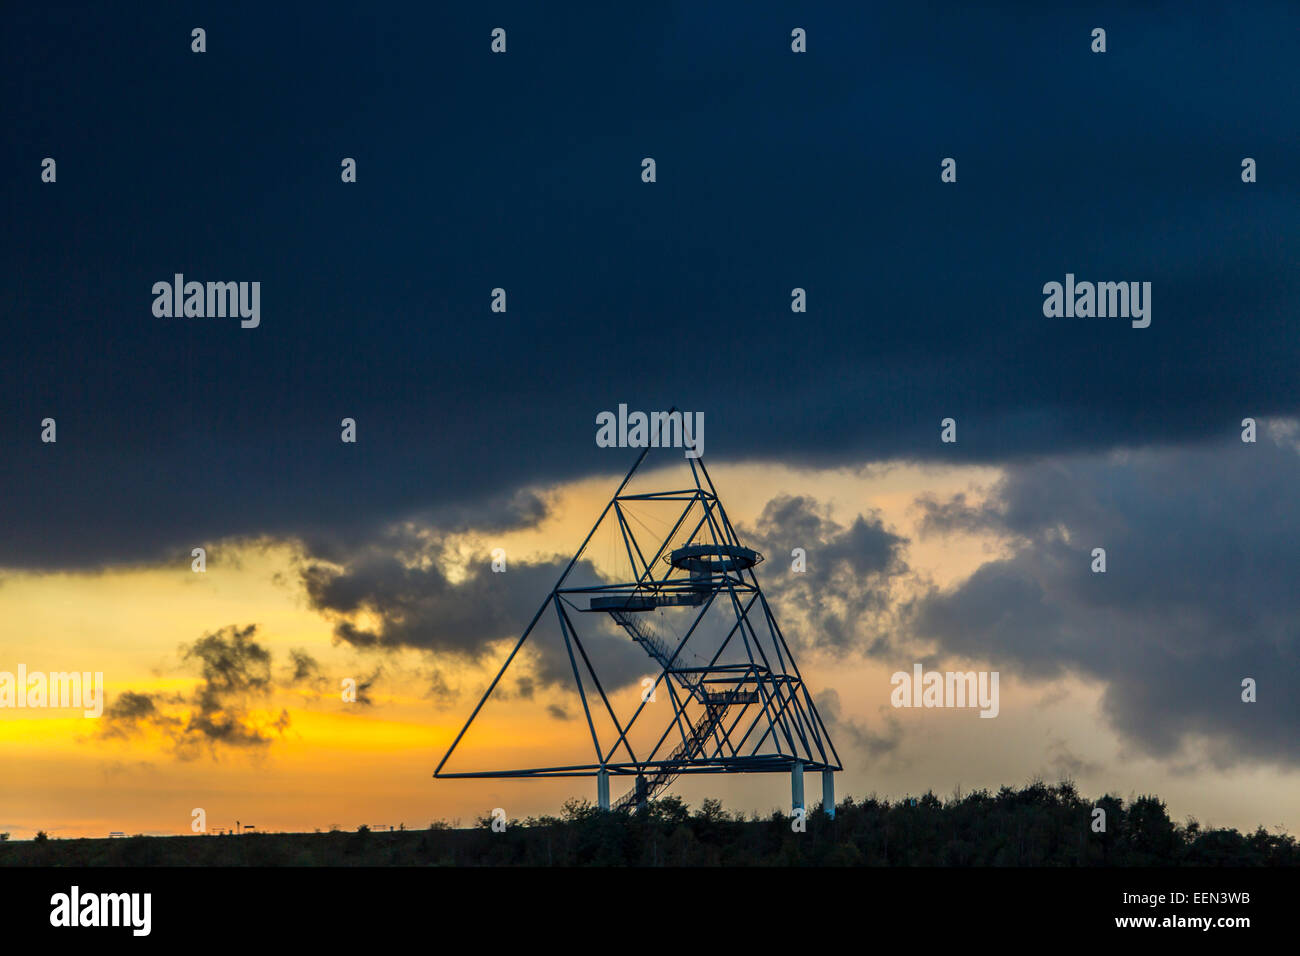 Tetraeder, a walkable sculpture, over 40 meters high, observation platform, on a stock pile in Bottrop, Germany Stock Photo